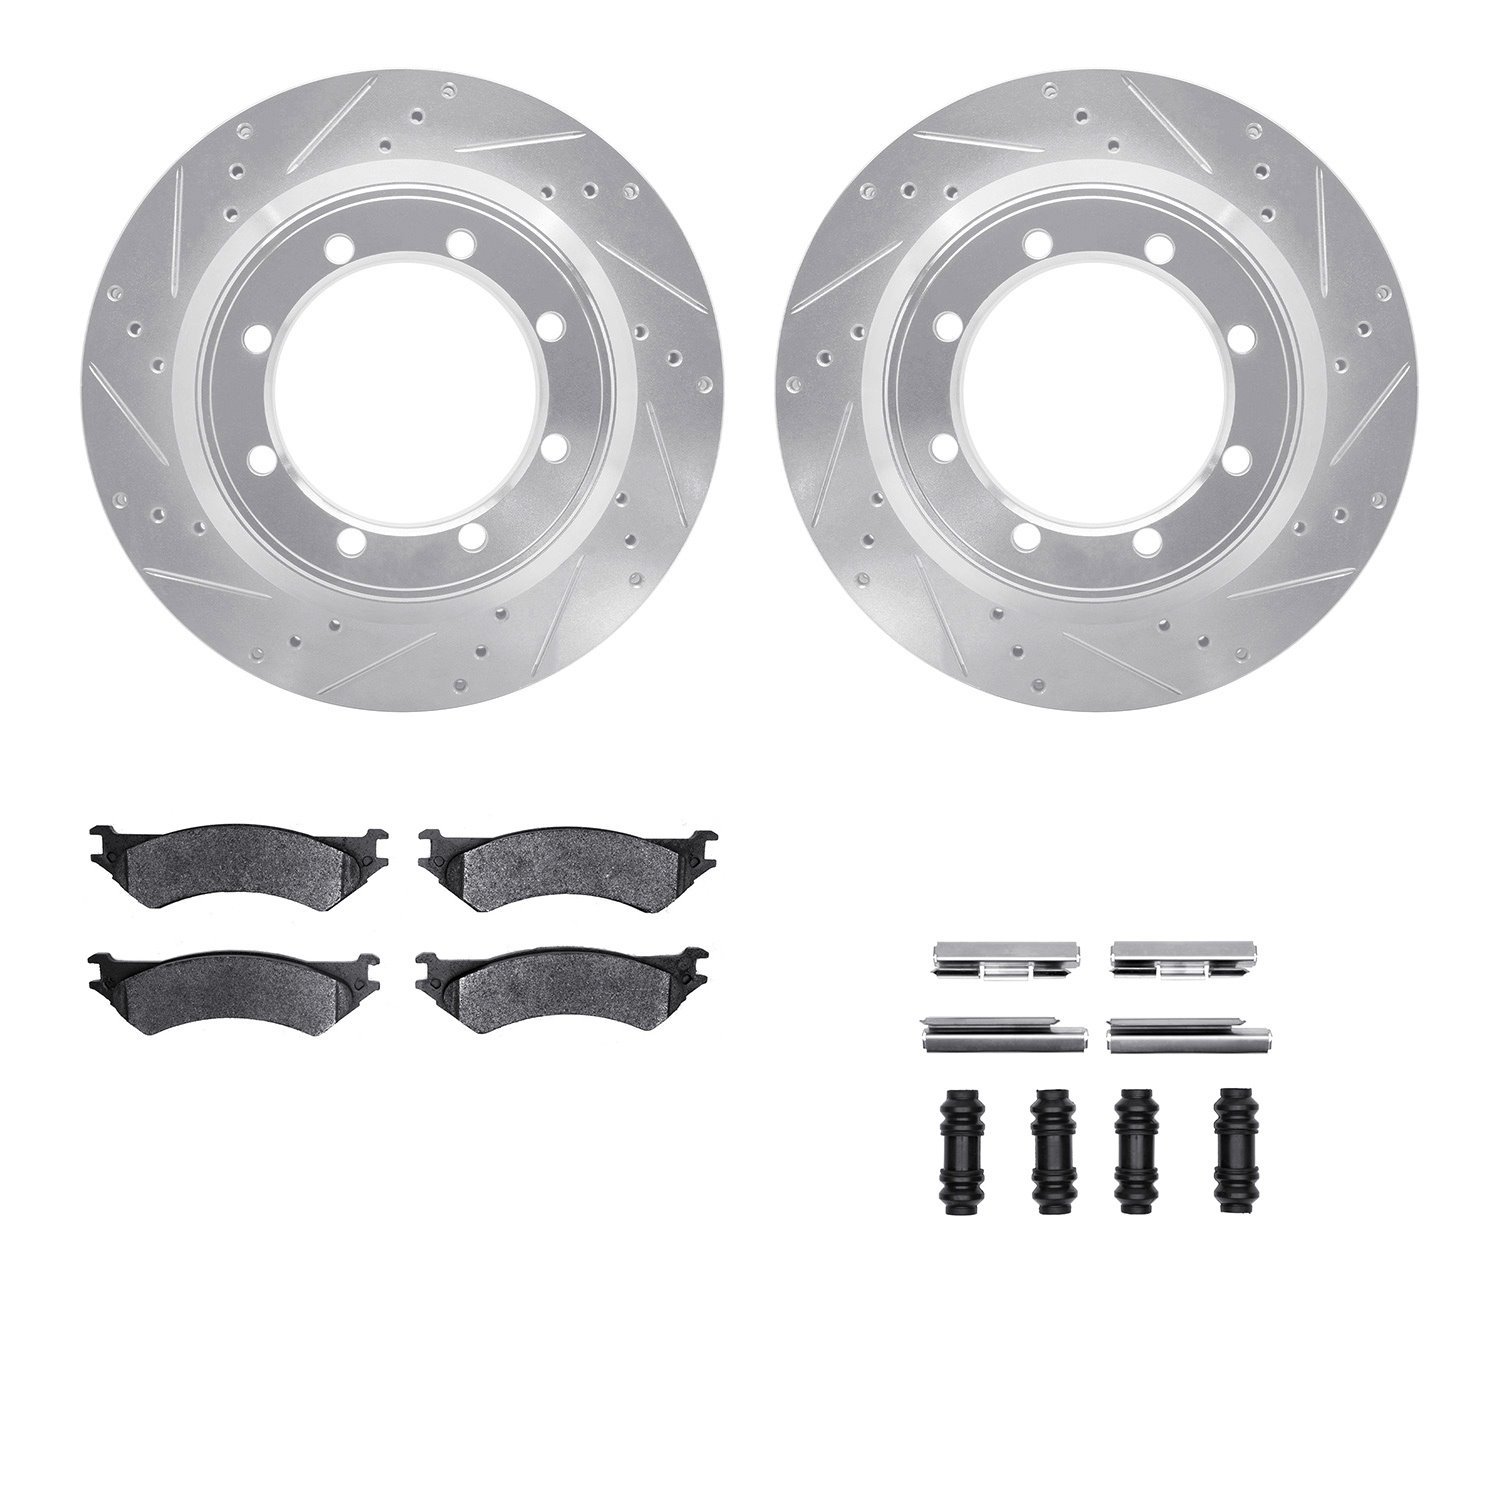 7212-99157 Drilled/Slotted Rotors w/Heavy-Duty Brake Pads Kit & Hardware [Silver], 1999-2007 Ford/Lincoln/Mercury/Mazda, Positio